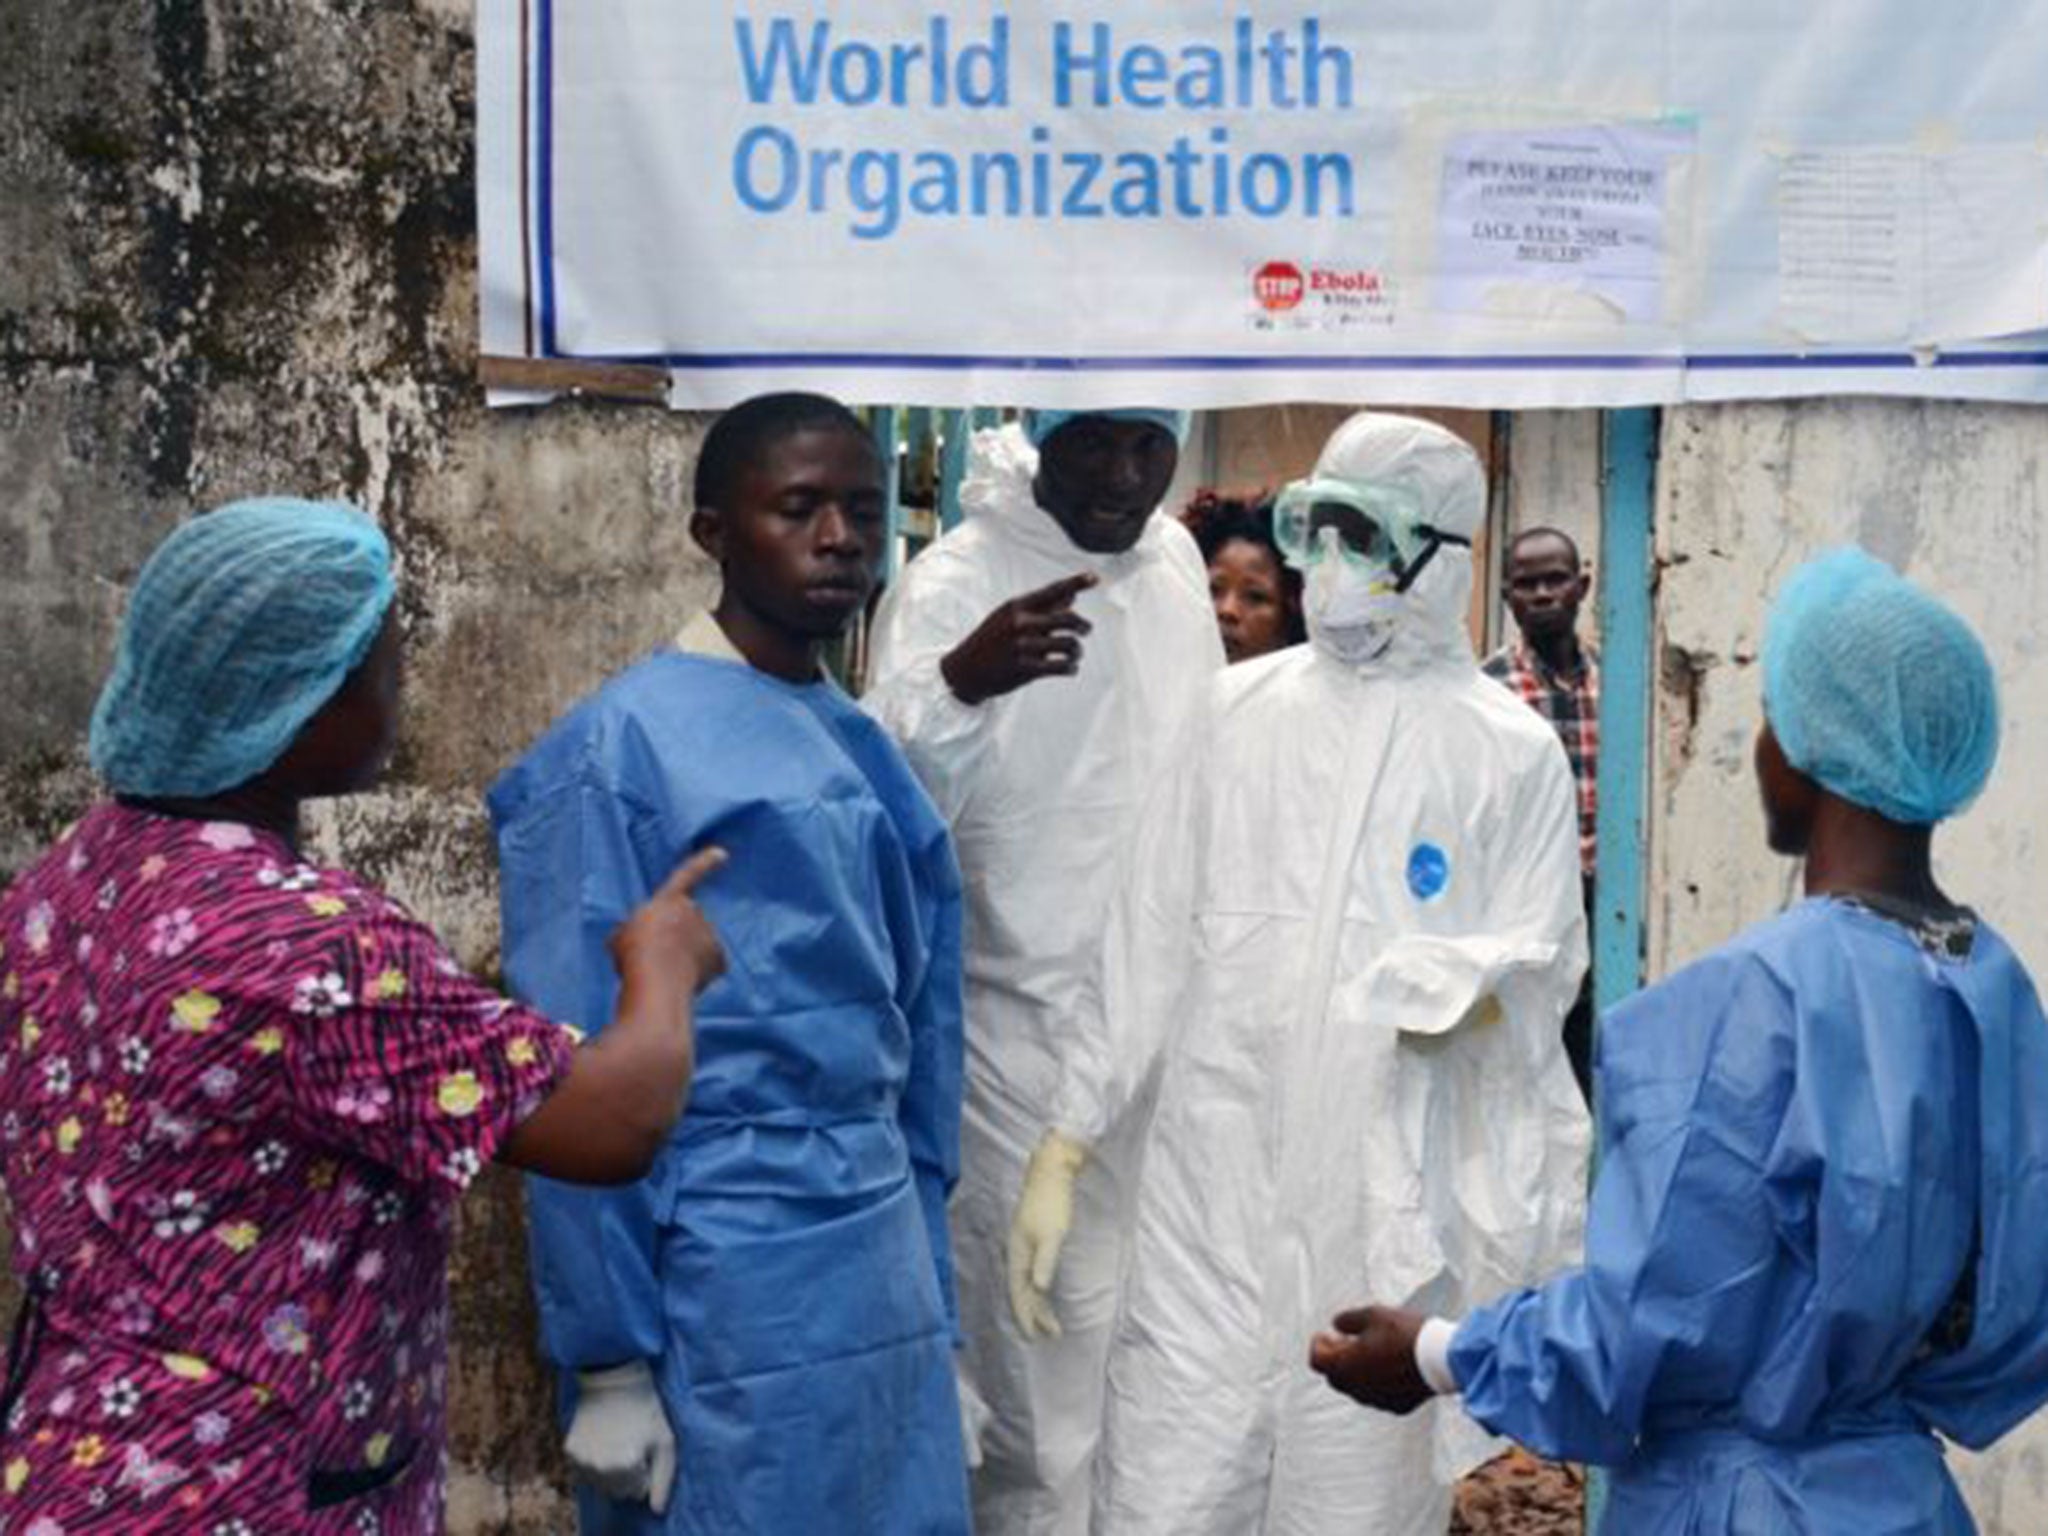 Health workers in protective gear outside the Ebola treatment unit of the John F. Kennedy Medical Center in Monrovia. Many workers have ignored calls to strike over poor pay and working conditions